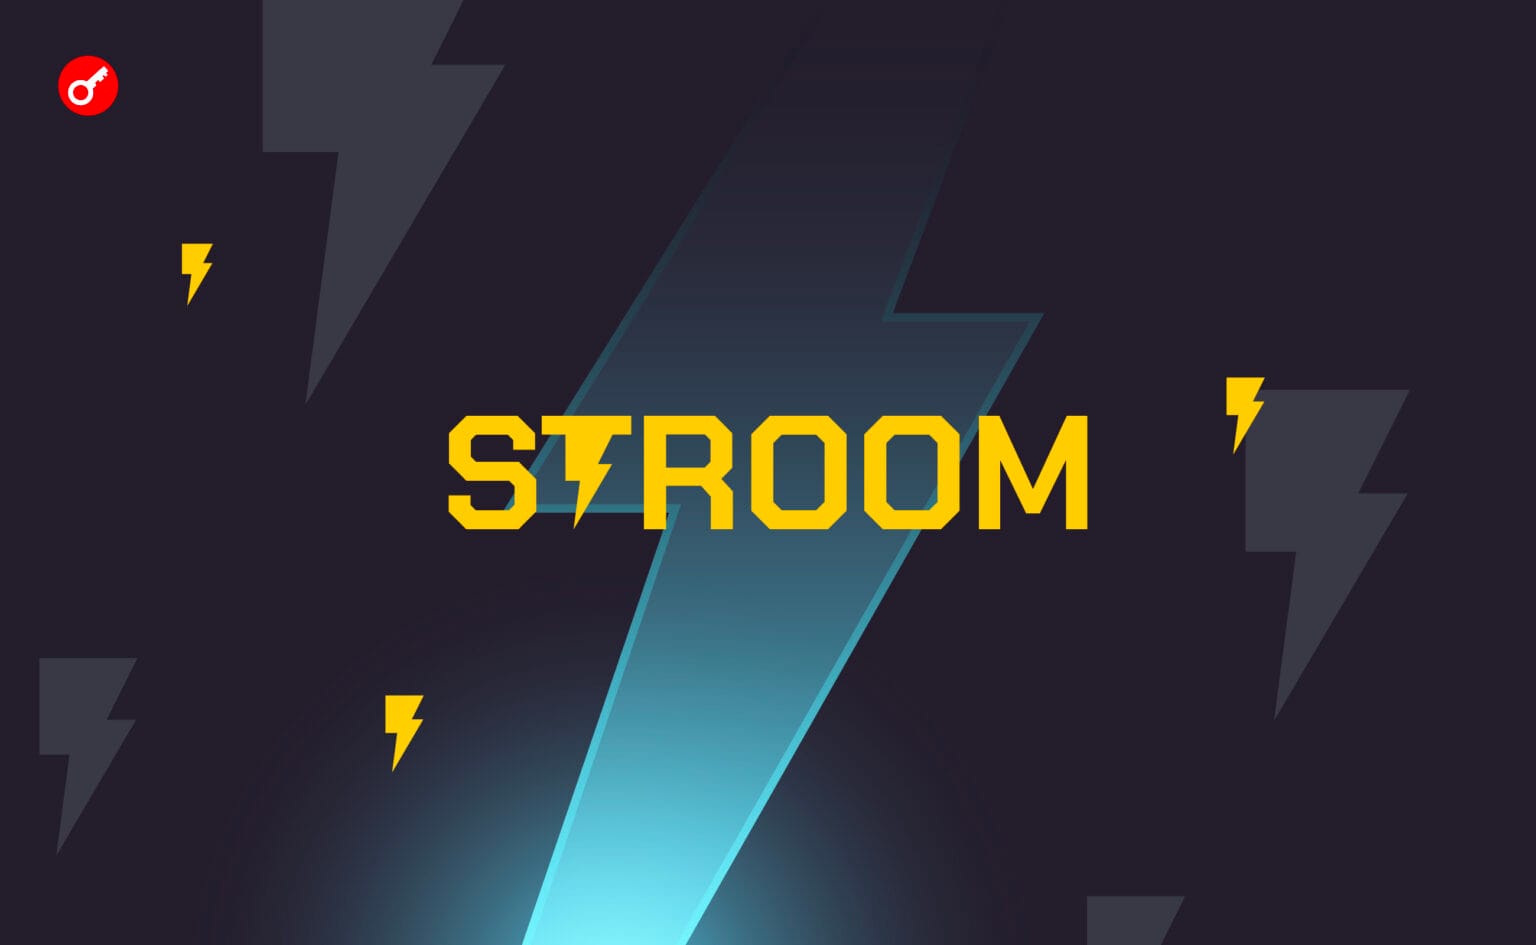 The Stroom team announced the launch of the testnet